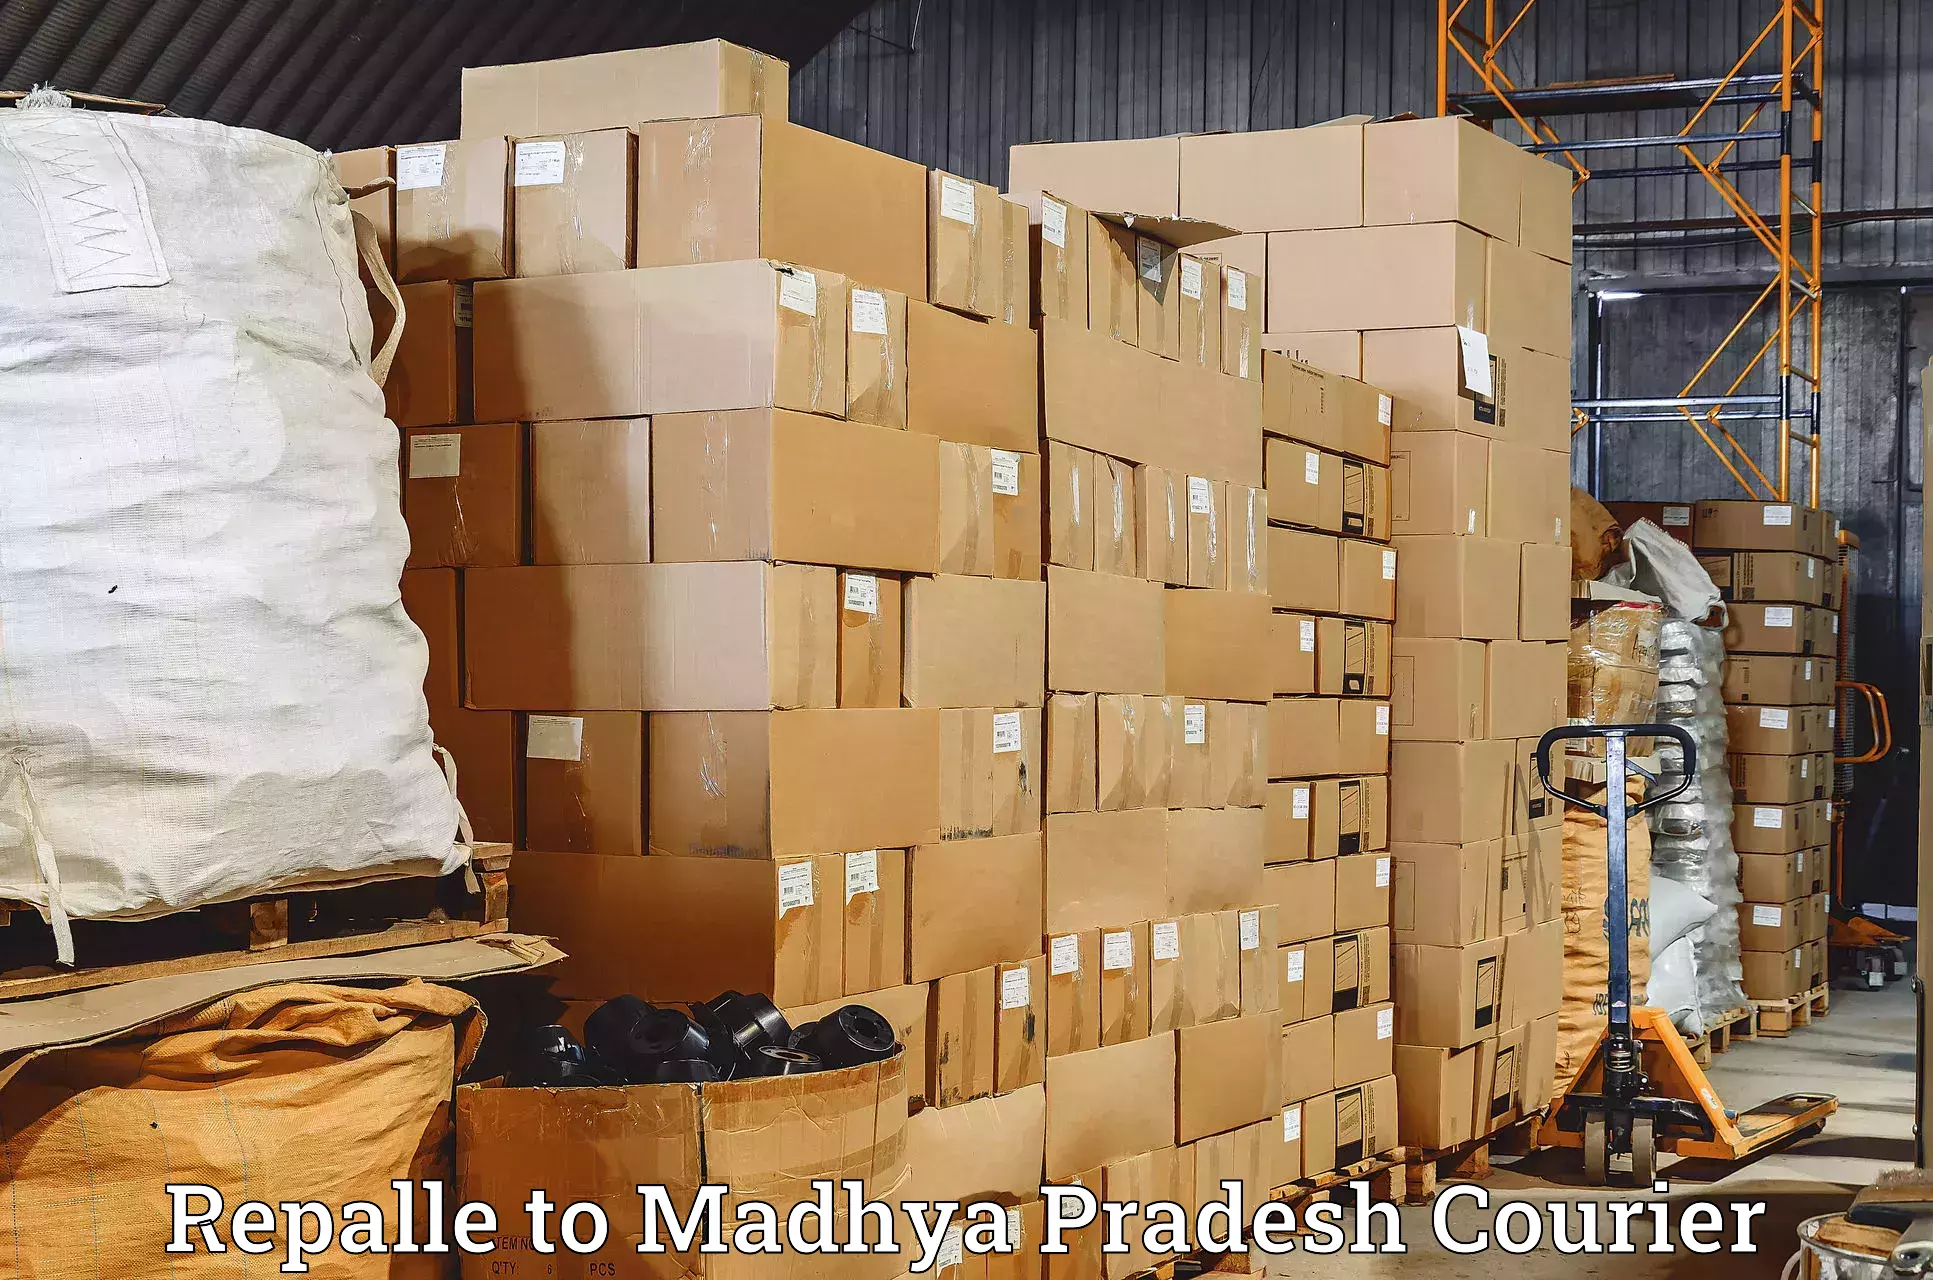 Cargo courier service Repalle to Chapda